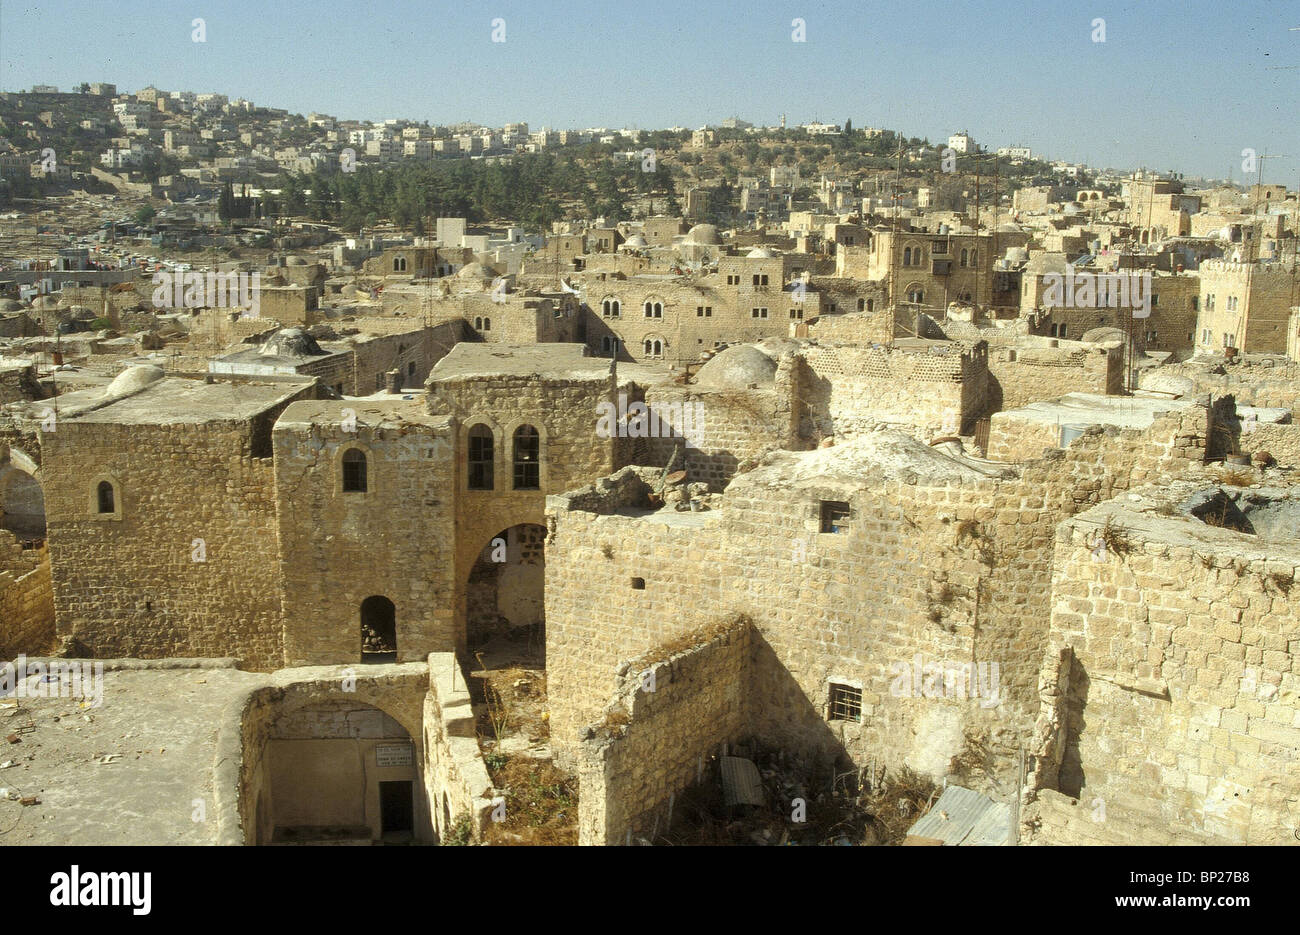 1625. HEBRON - GENERAL VIEW OF THE OLD CITY Stock Photo